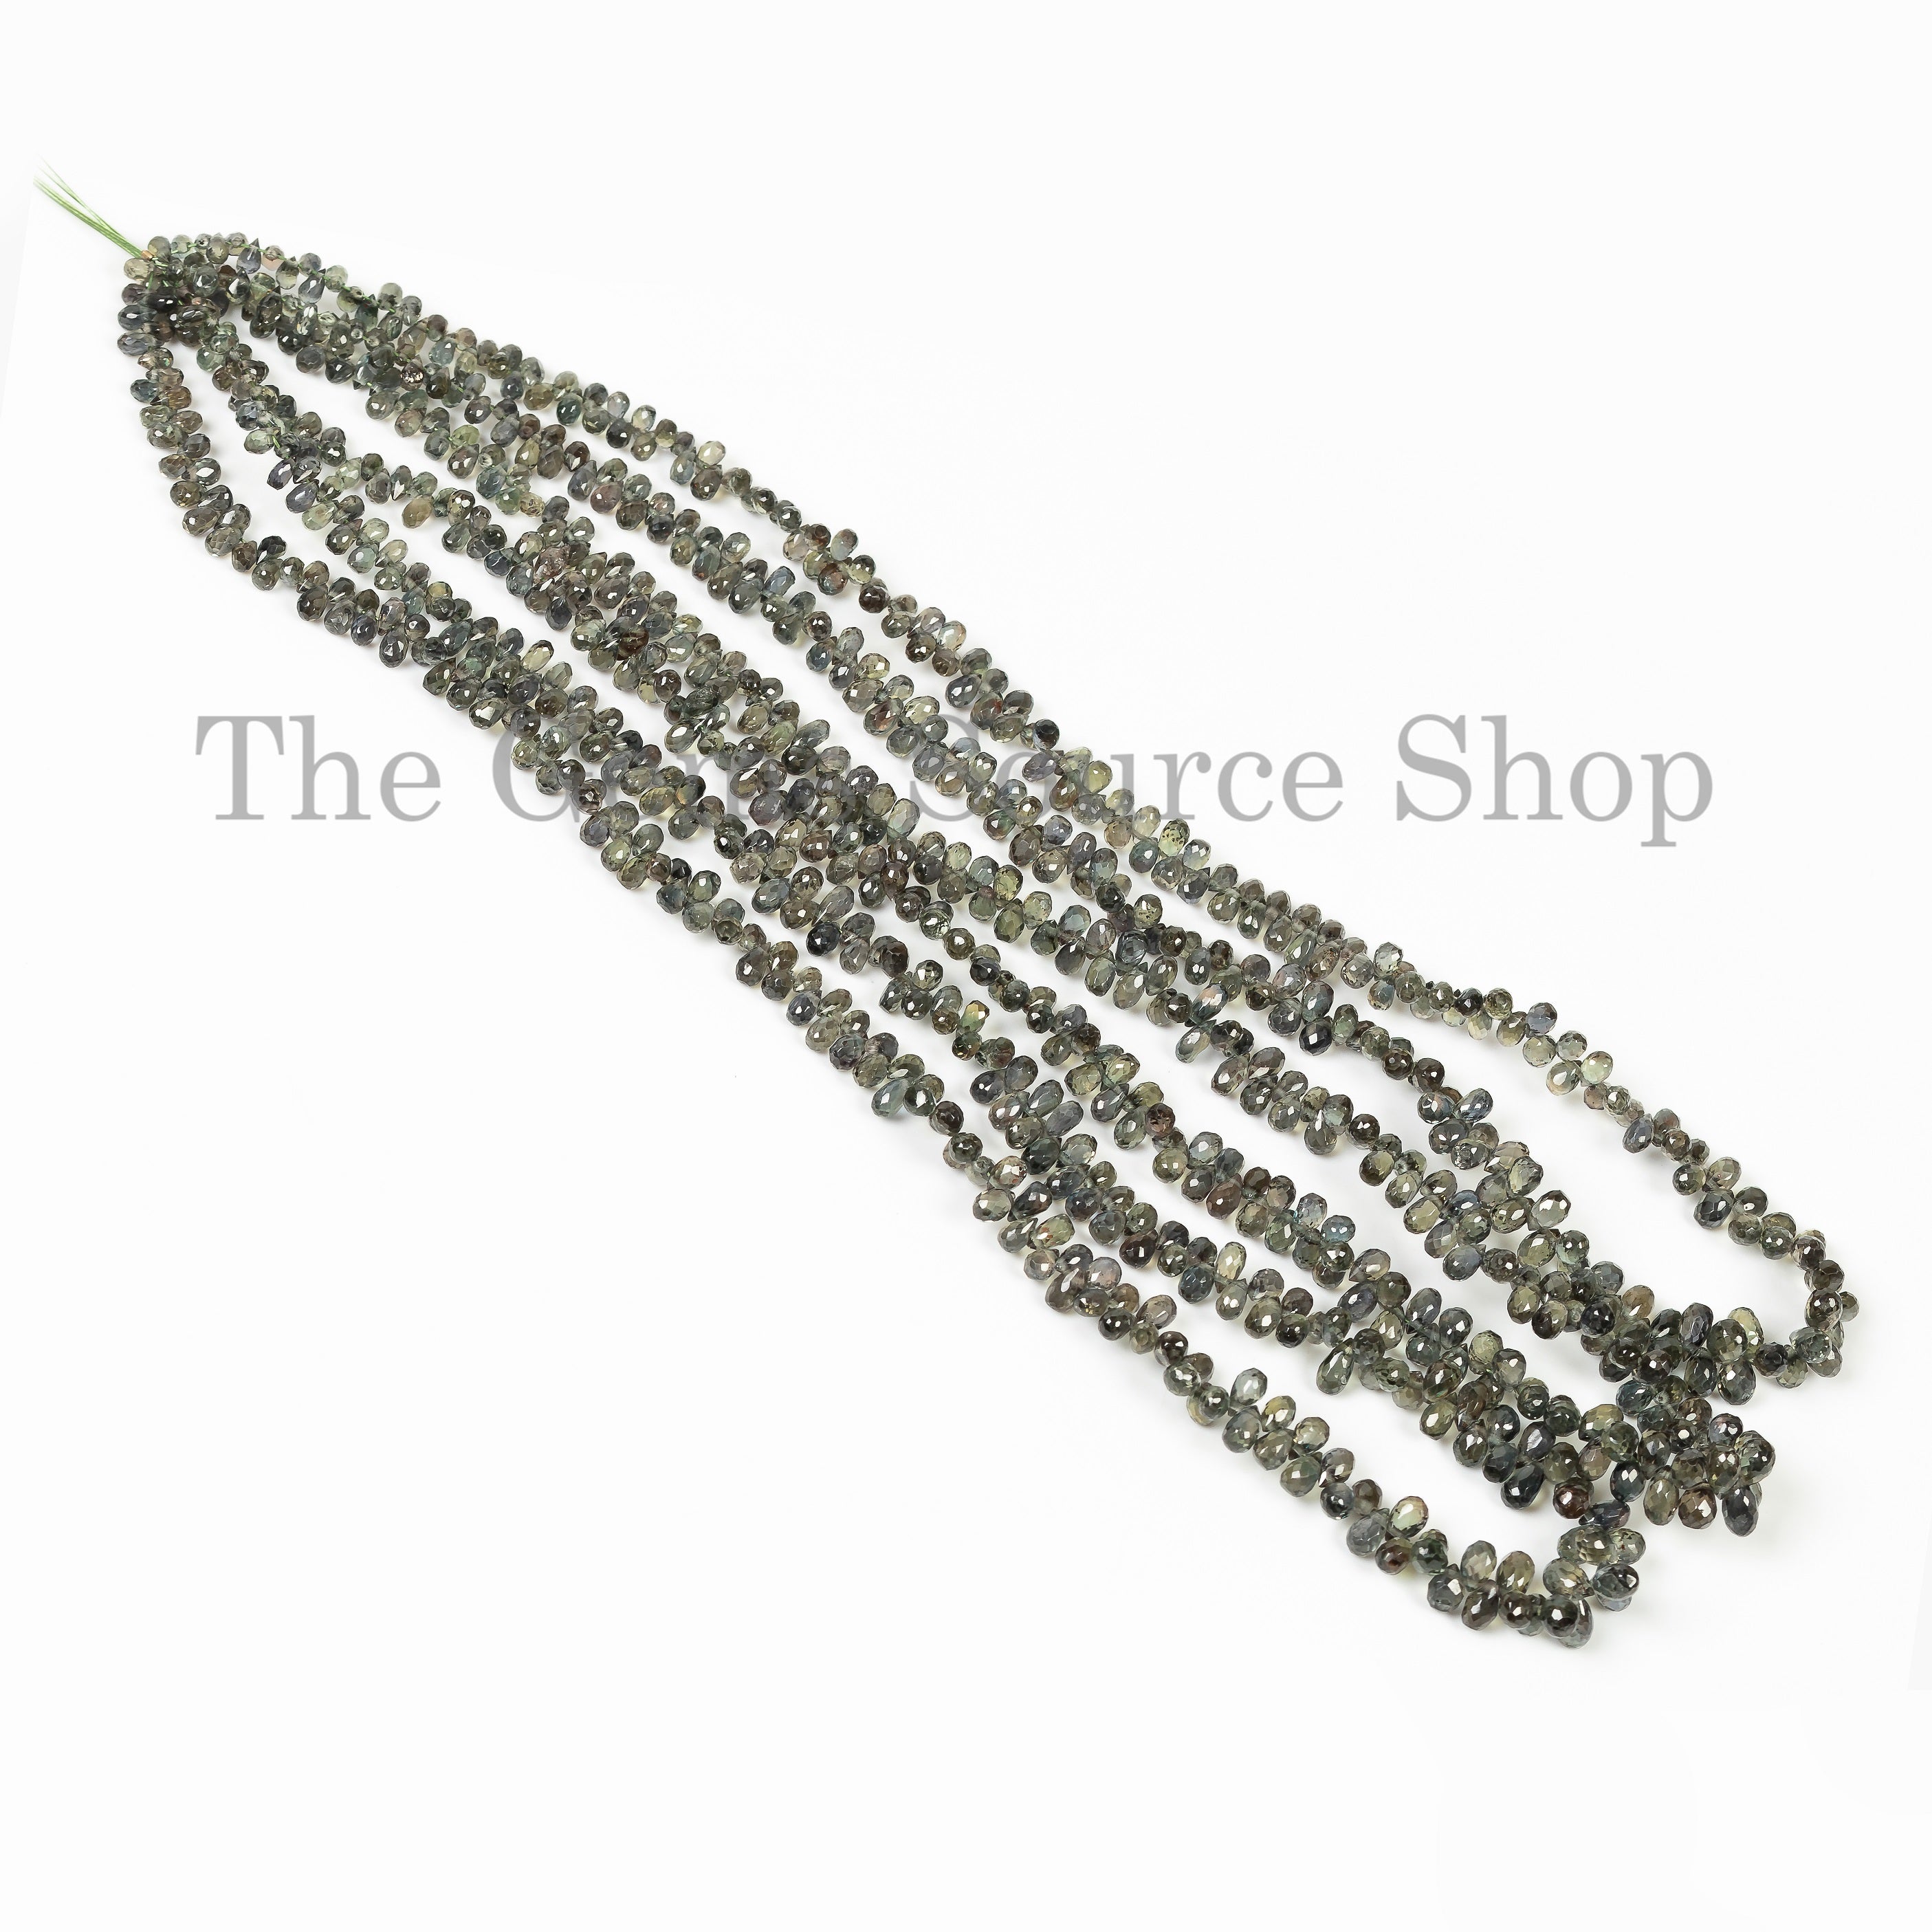 Alexandrite Sapphire Faceted Briolette Drops Beads TGS-4547